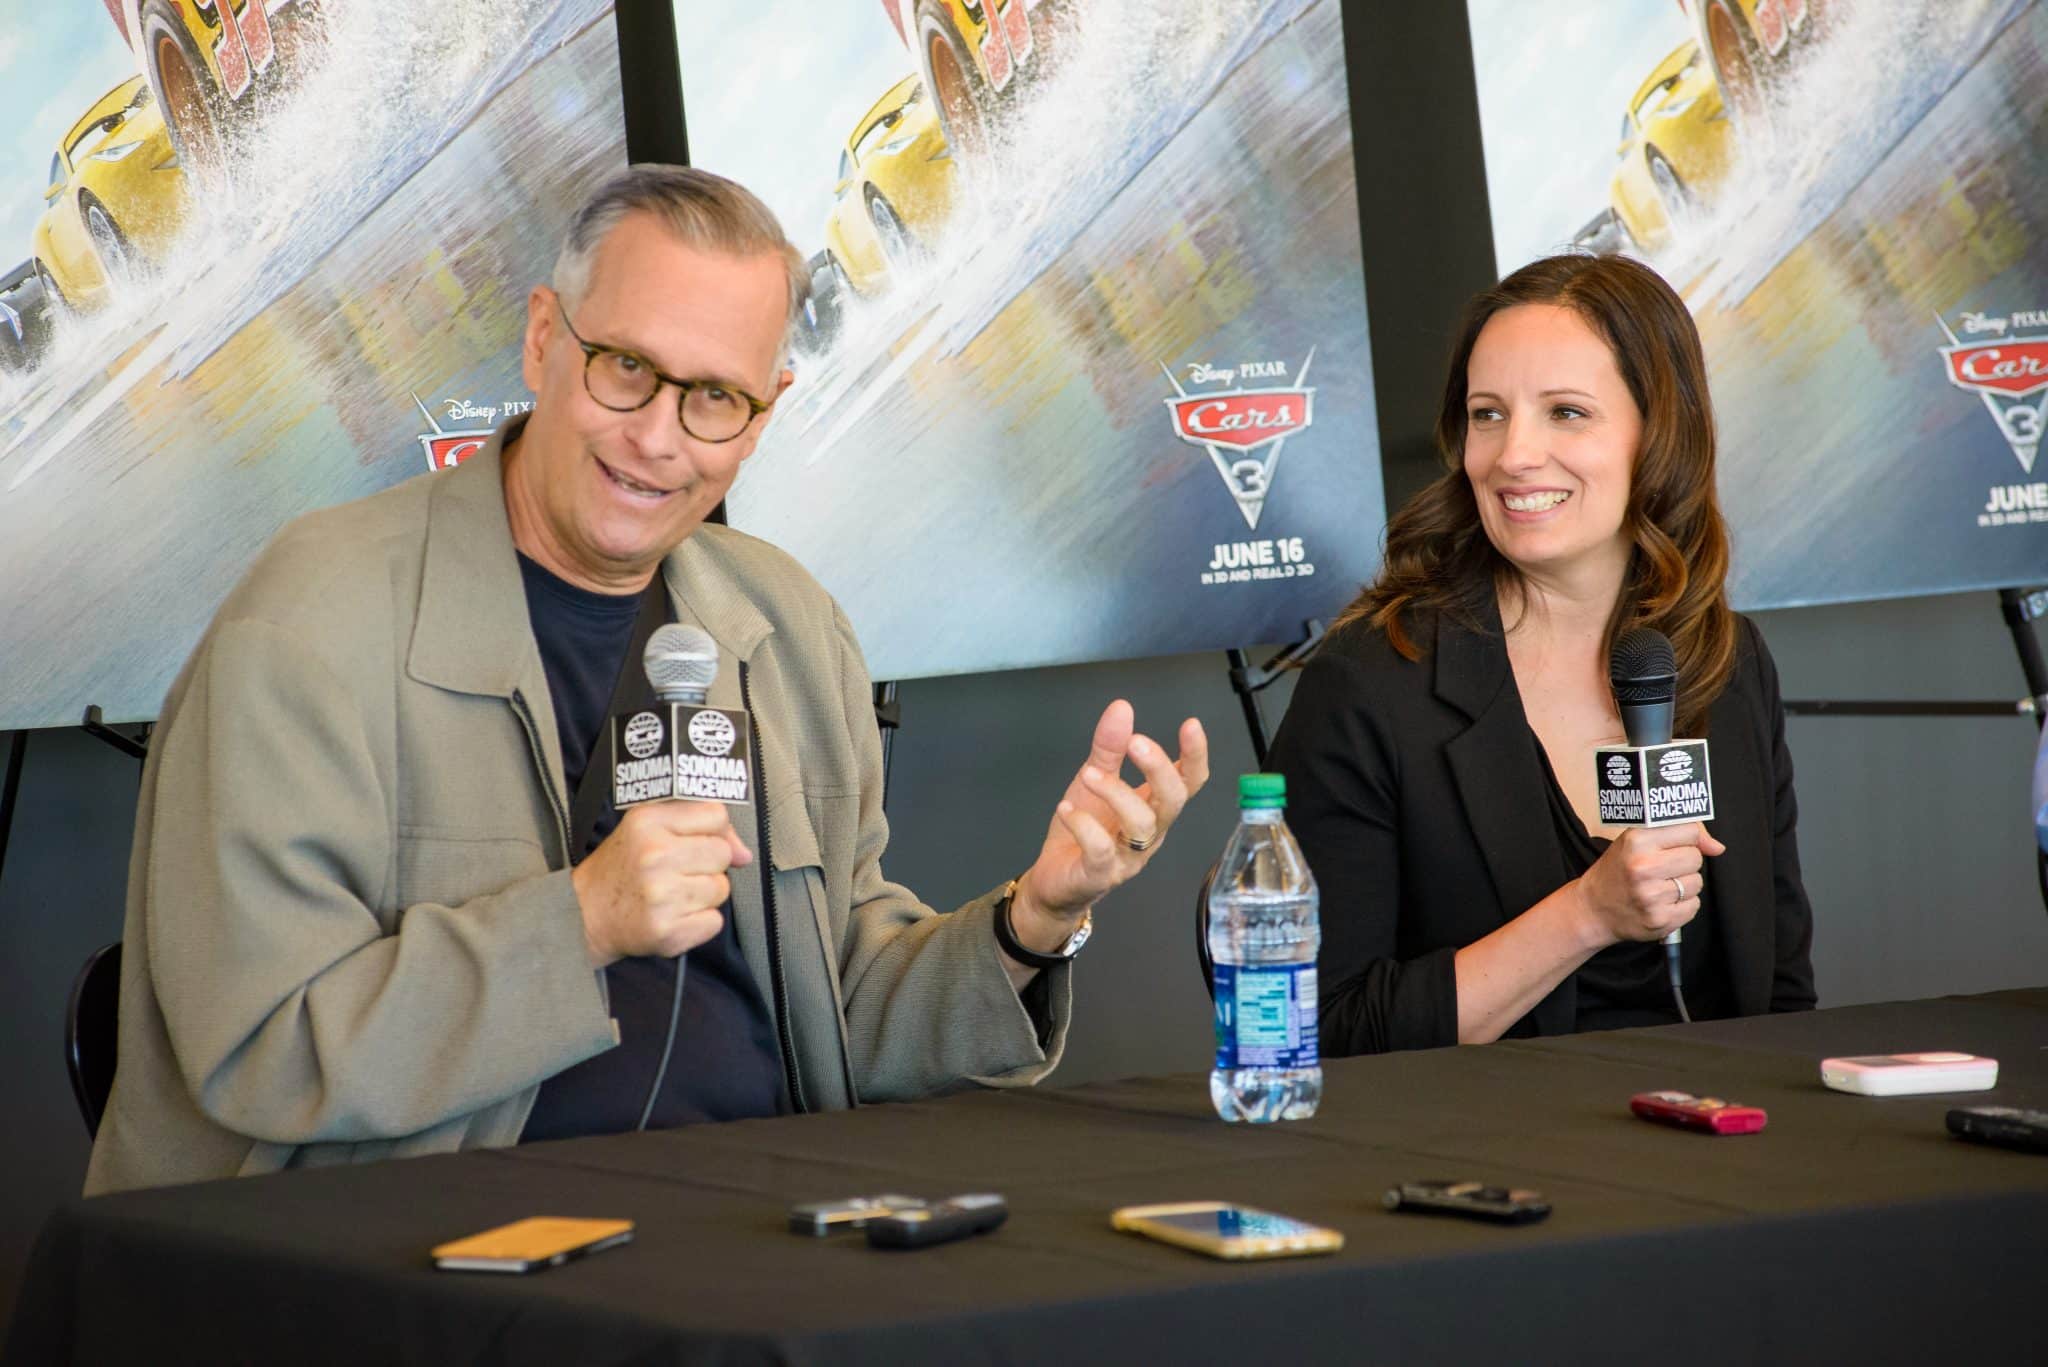 Cars 3 Director & Producer Interviews! #Cars3Event